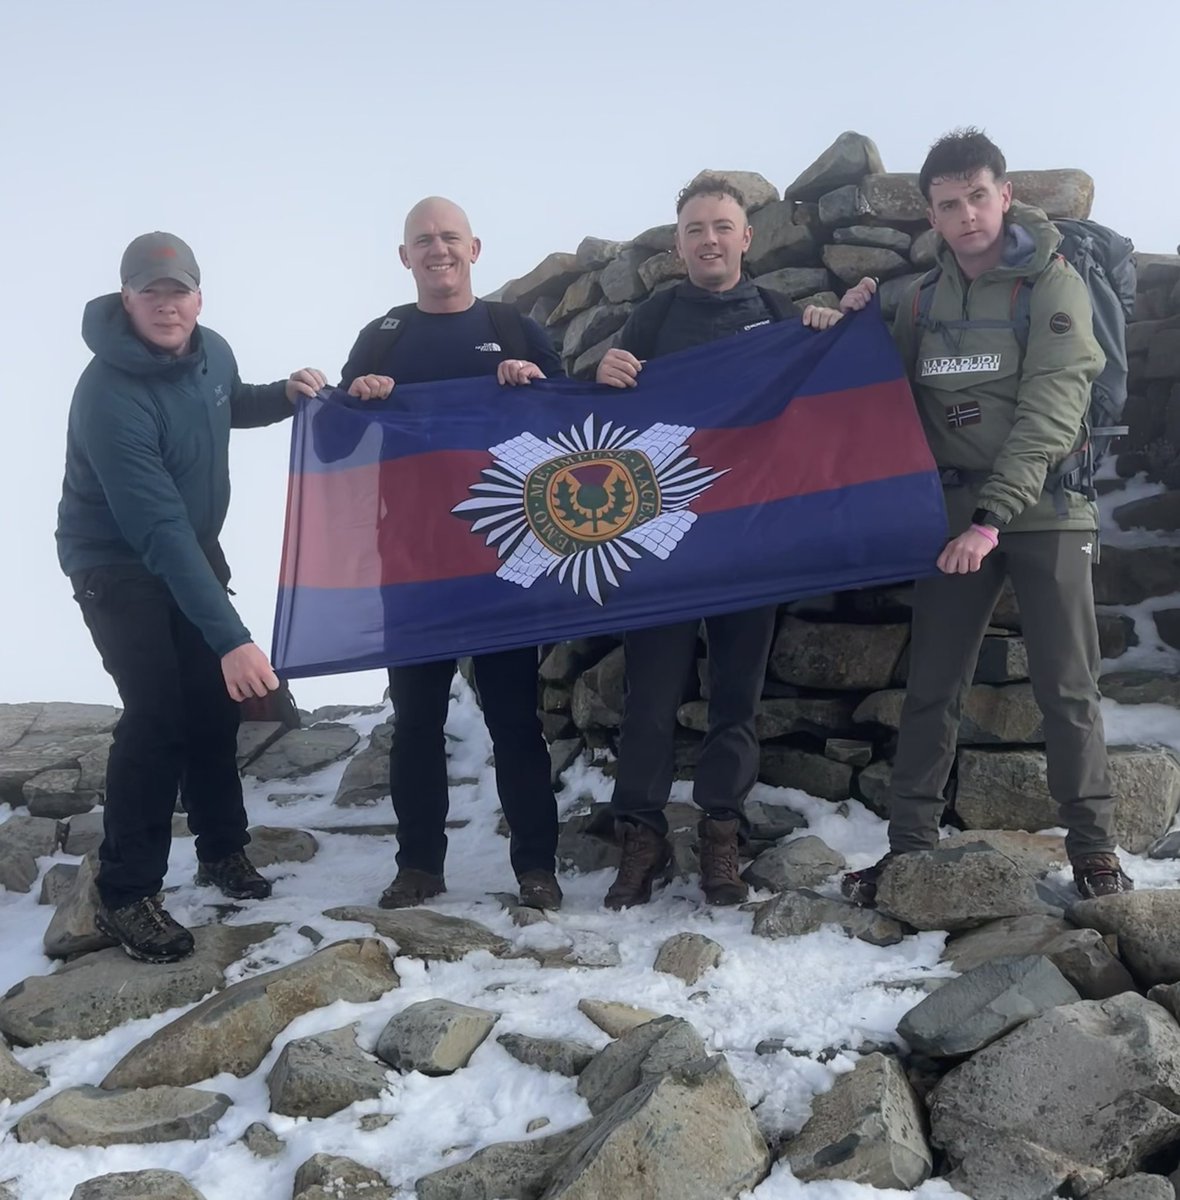 The National Three Peaks Team from @scots_guards is conducting recces, ready for the off on 1st May. They are at 43% of their target for @ArmyBenFund and @scots_guards Charity. Please support👉 justgiving.com/page/brett-gun… 😉 @GunningMr @BFBSCatterick @Kirky_Kirkwood @AmySimeon